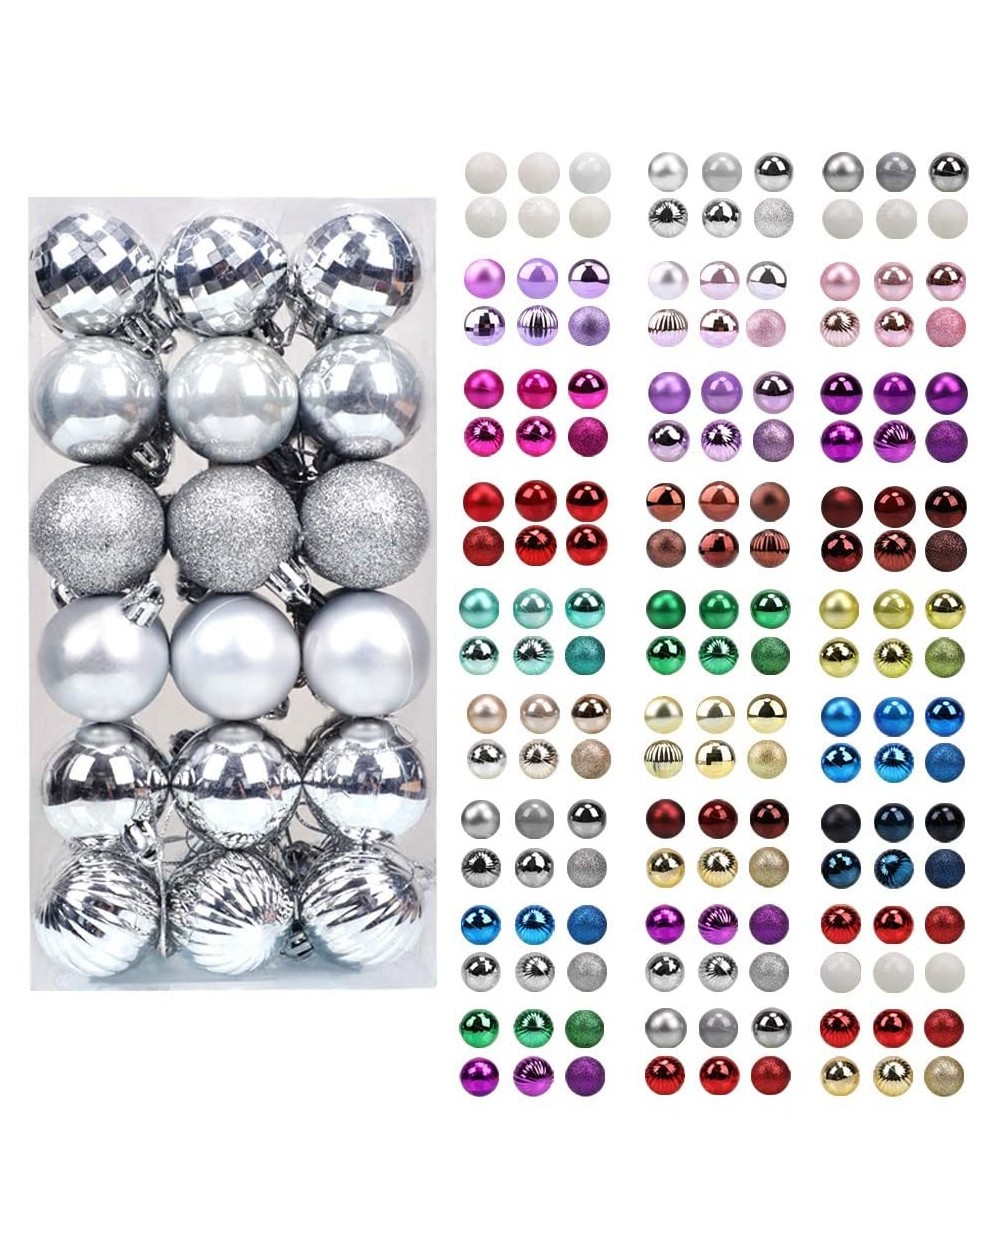 Ornaments Christmas Balls Ornaments for Xmas Tree- 36ct Plastic Shatterproof Baubles Colored and Glitter Christmas Party Deco...